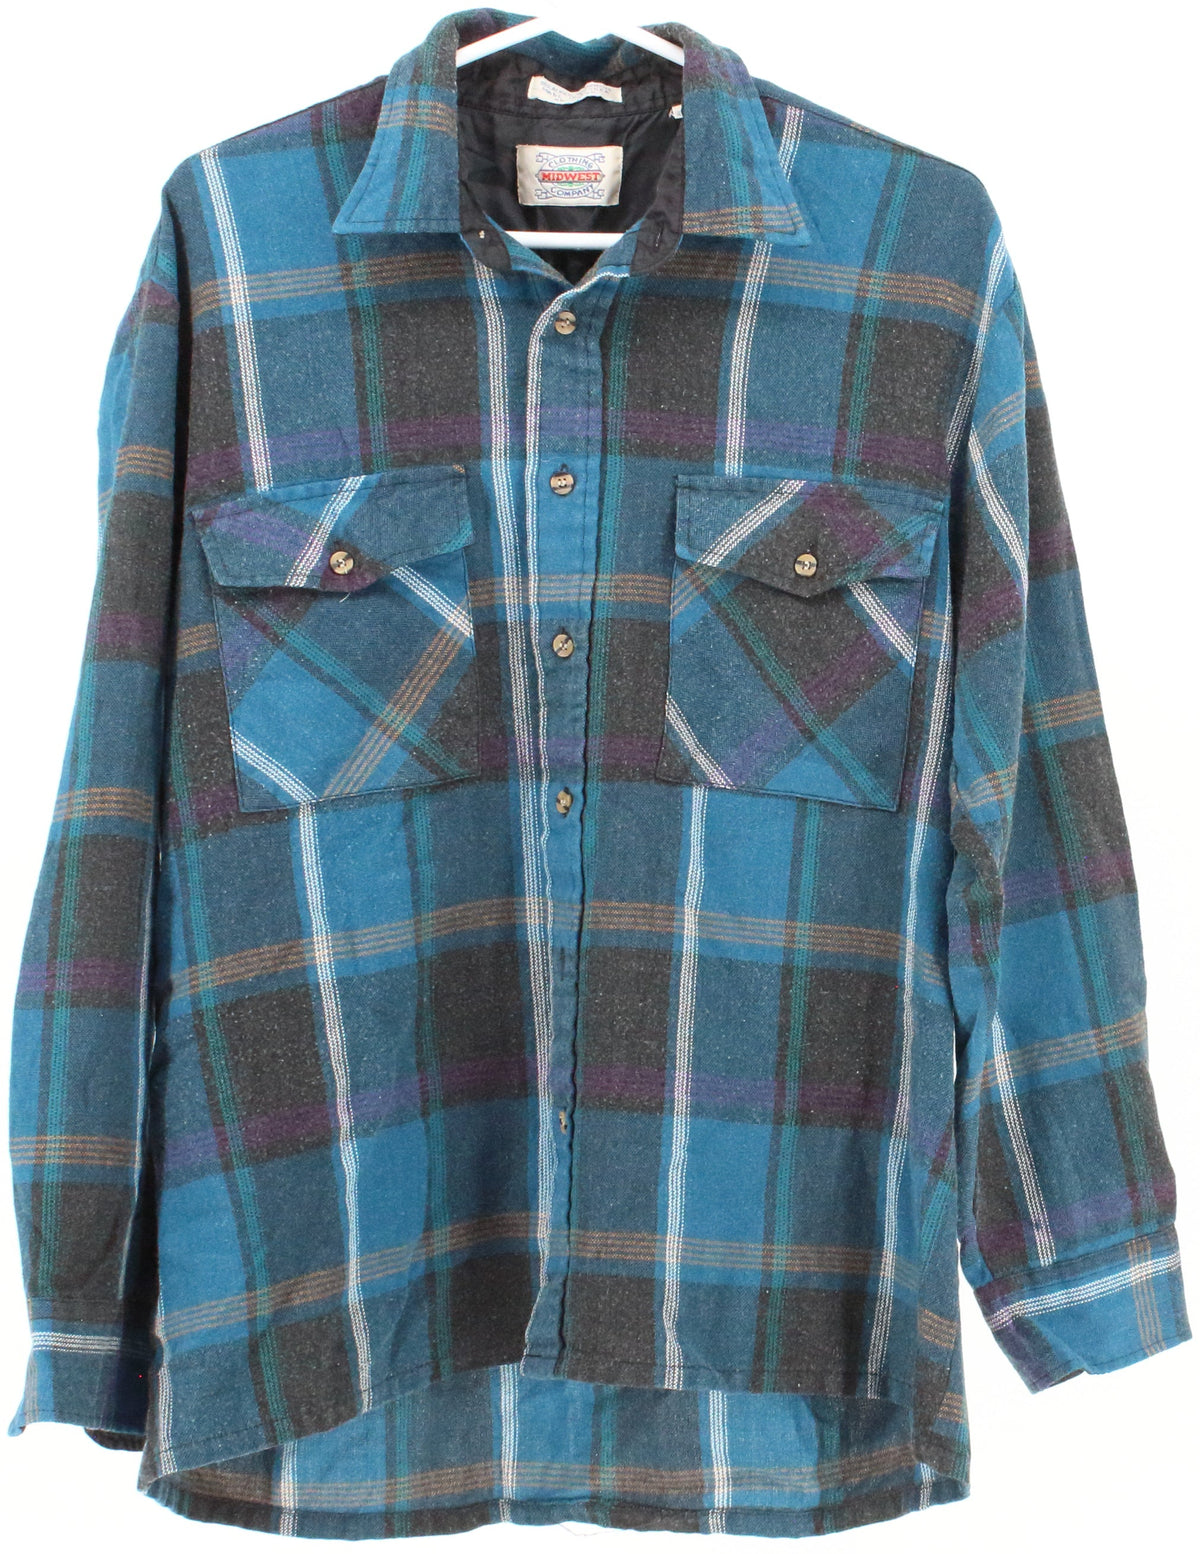 Midwest Blue and Black Plaid Flannel Shirt